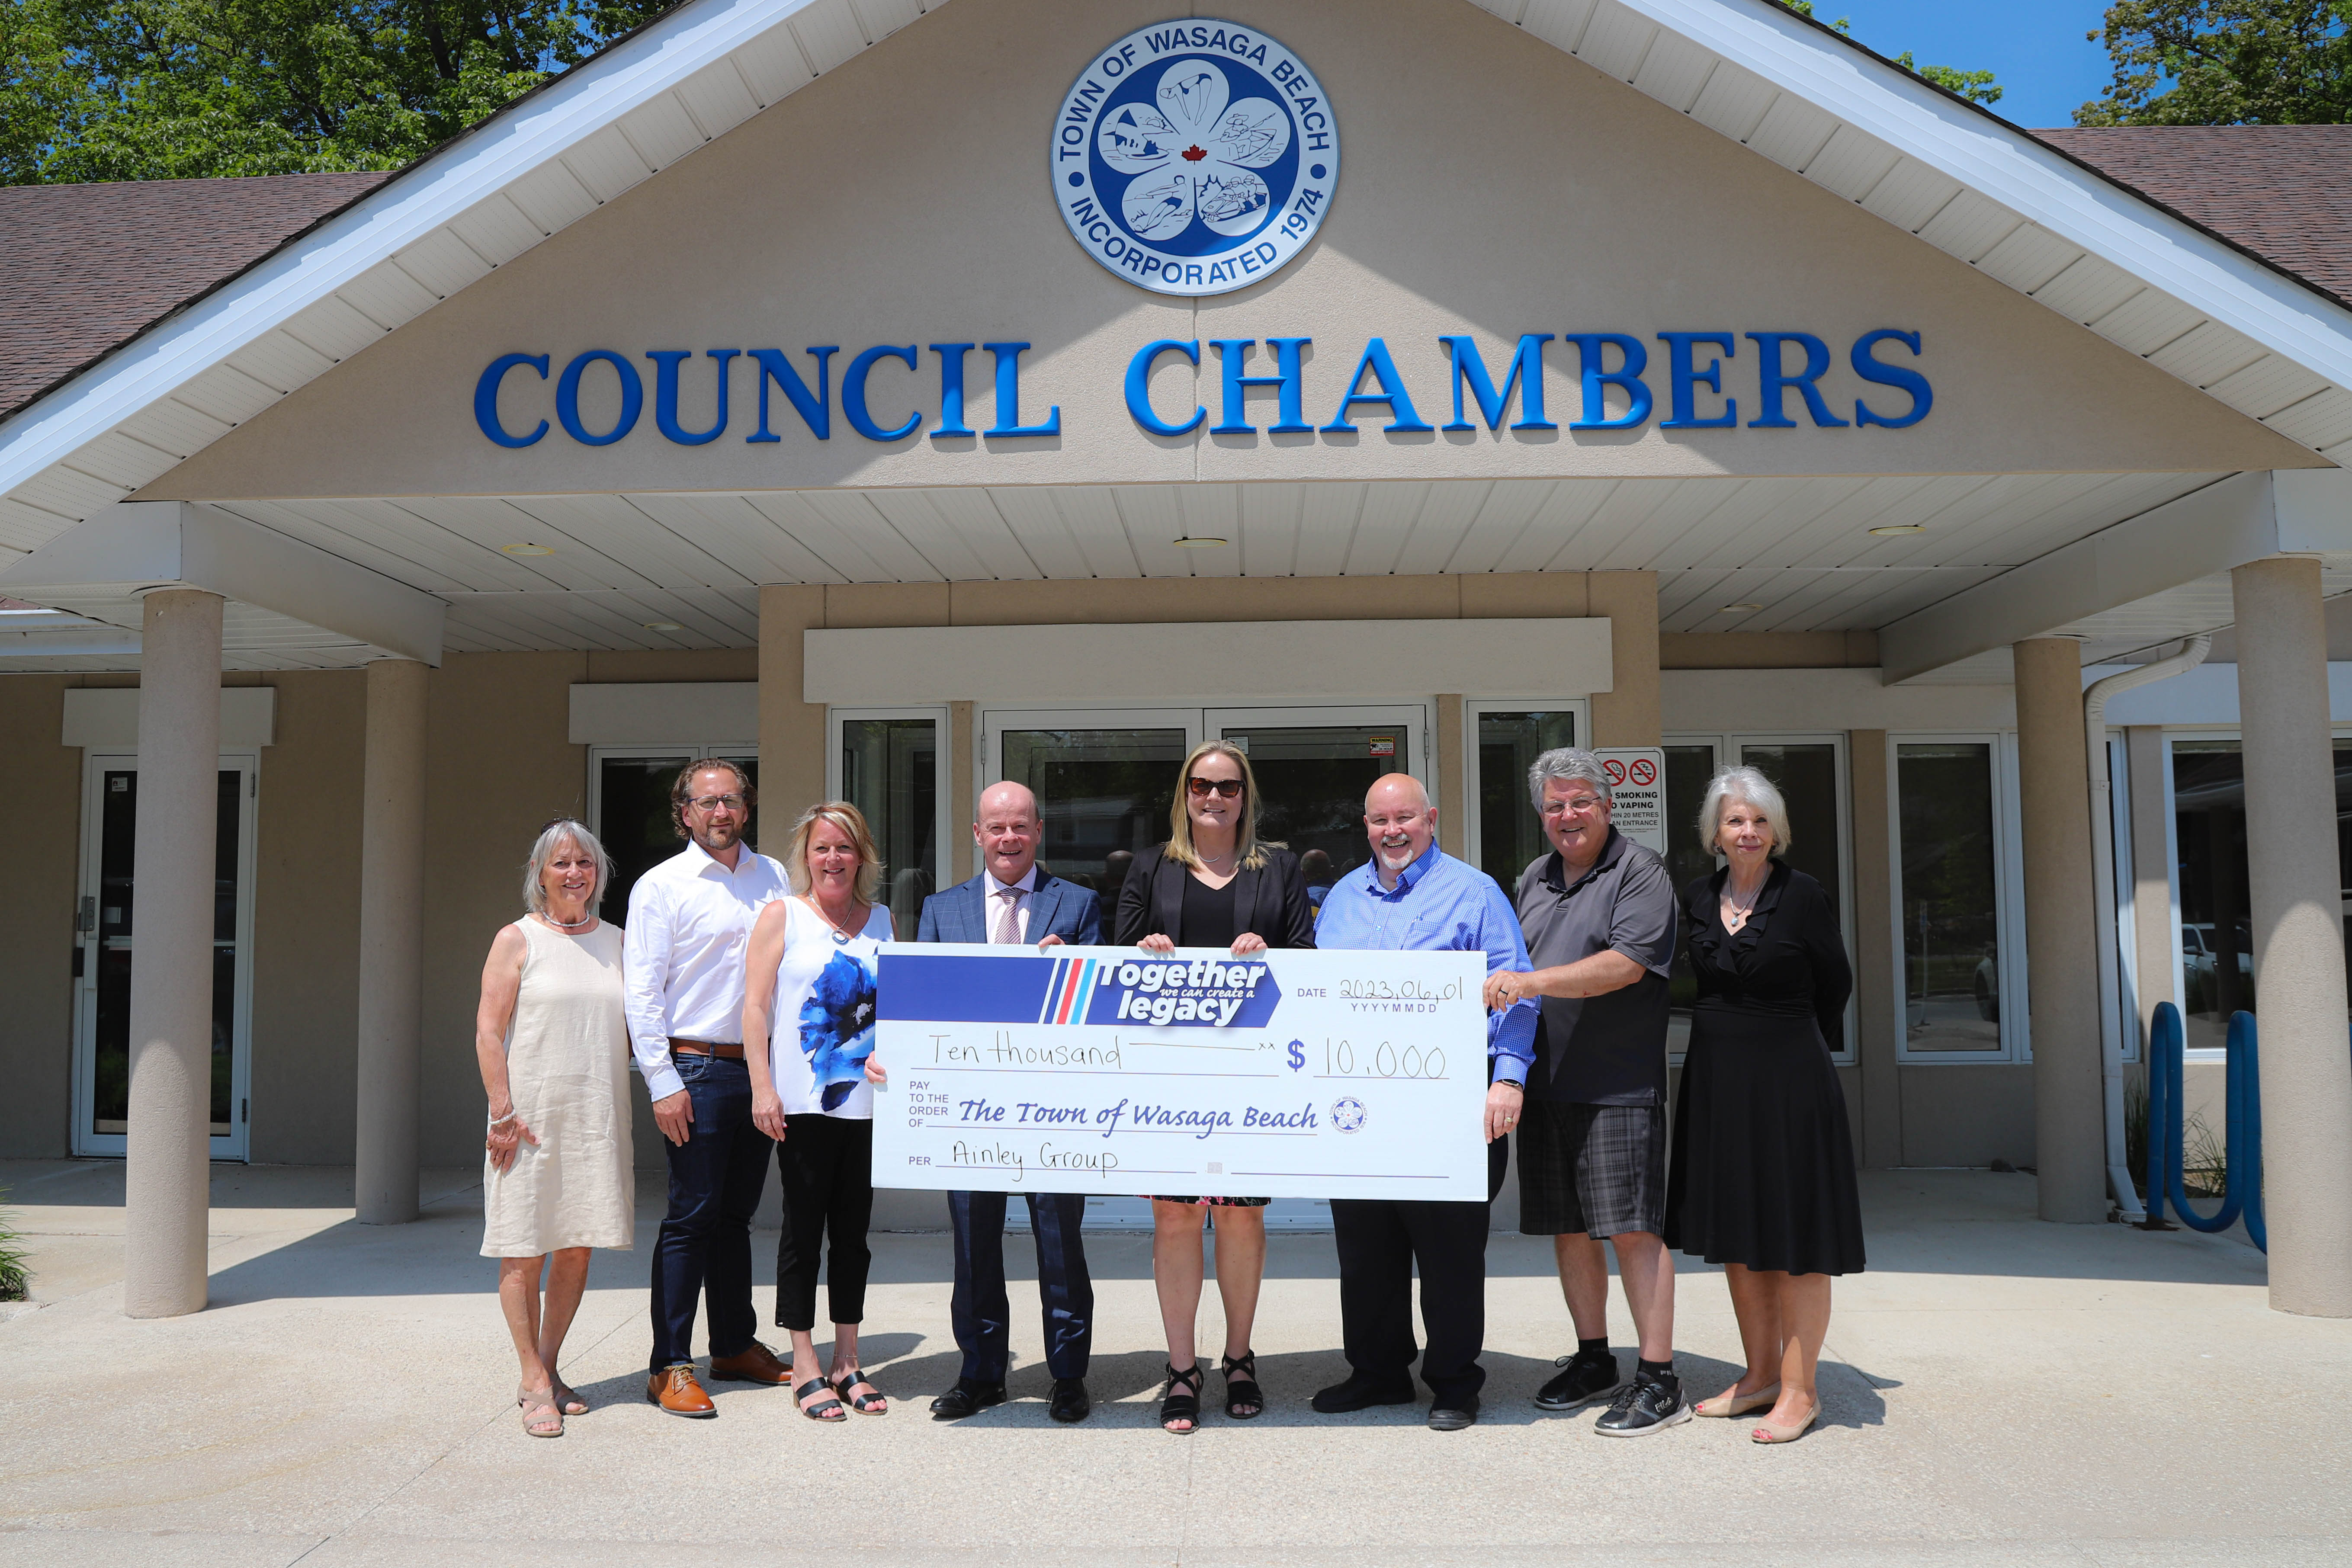 councillors holding a $10,000 check from Ainley Group